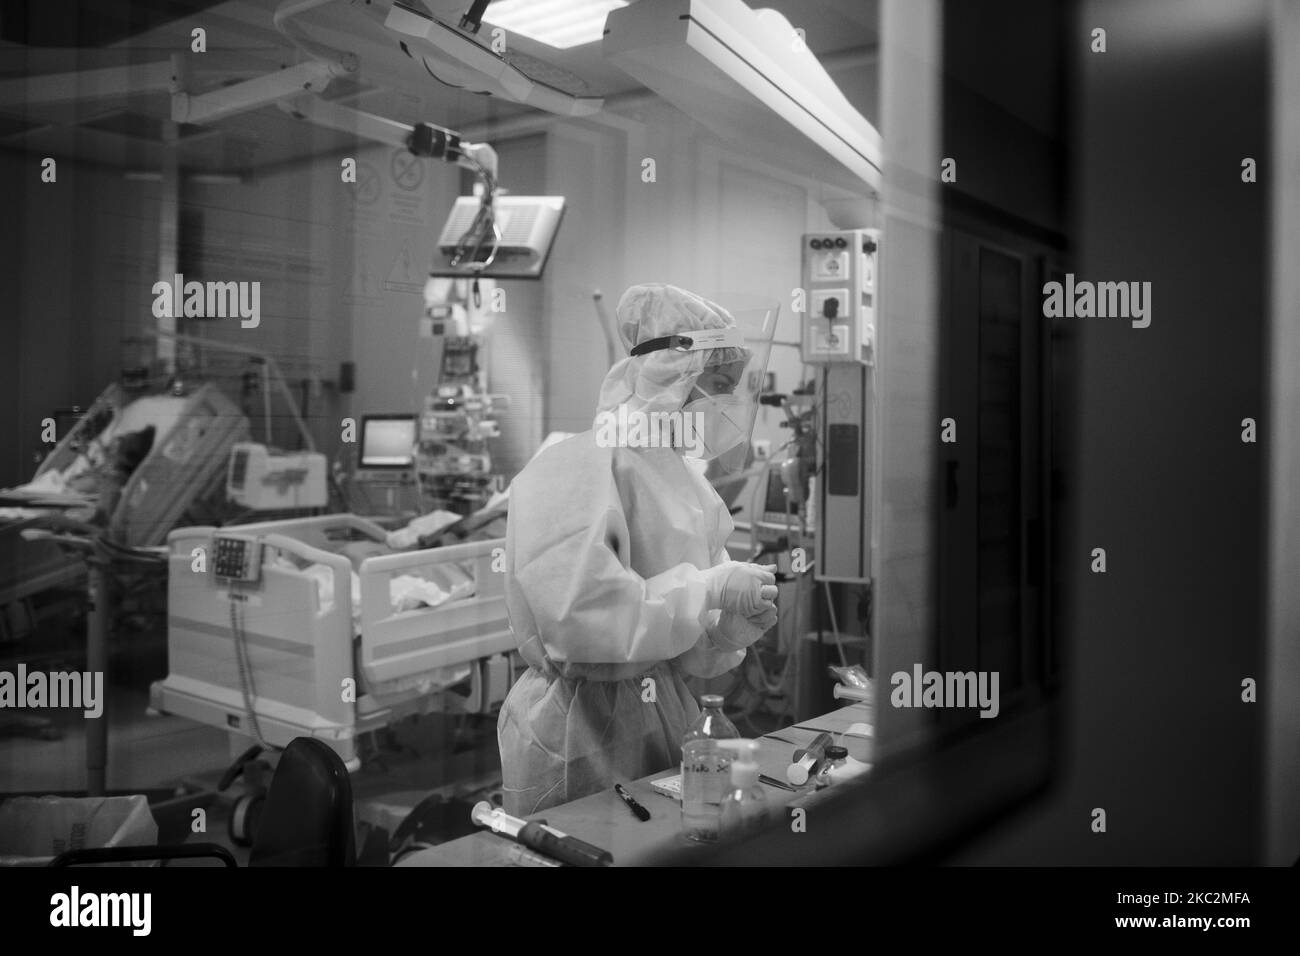 (EDITOR'S NOTE: IMAGE HAS BEEN CONVERTED TO BLACK AND WHITE) A medical worker in personal protective equipment (PPE)is seen in the COVID level-3, Intensive Care Unit (ICU) for novel coronavirus, COVID-19 cases, at the Casal Palocco hospital, near Rome on October 26, 2020. .According to Ministry of Health there has been 21,273 infections from Covid-19 in the last 24 hours out of 161,880 tampons carried out. 128 deaths and 80 additional patients admitted to intensive care units. (Photo by Christian Minelli/NurPhoto) Stock Photo